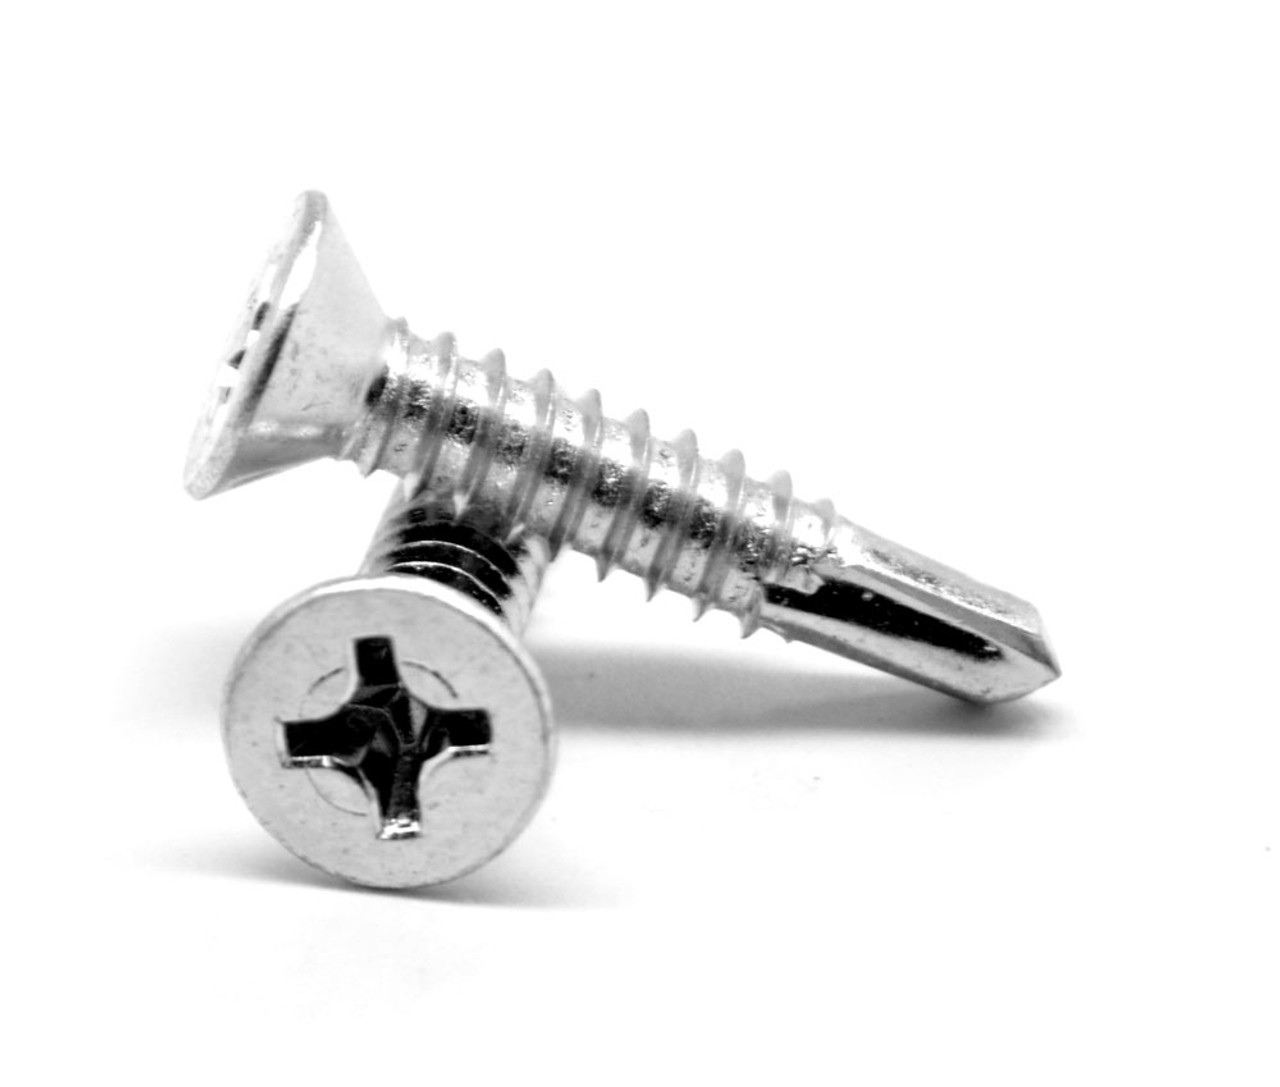 #10-16 x 1 1/4" (FT) Self Drilling Screw Phillips Flat Head #3 Point Stainless Steel 18-8